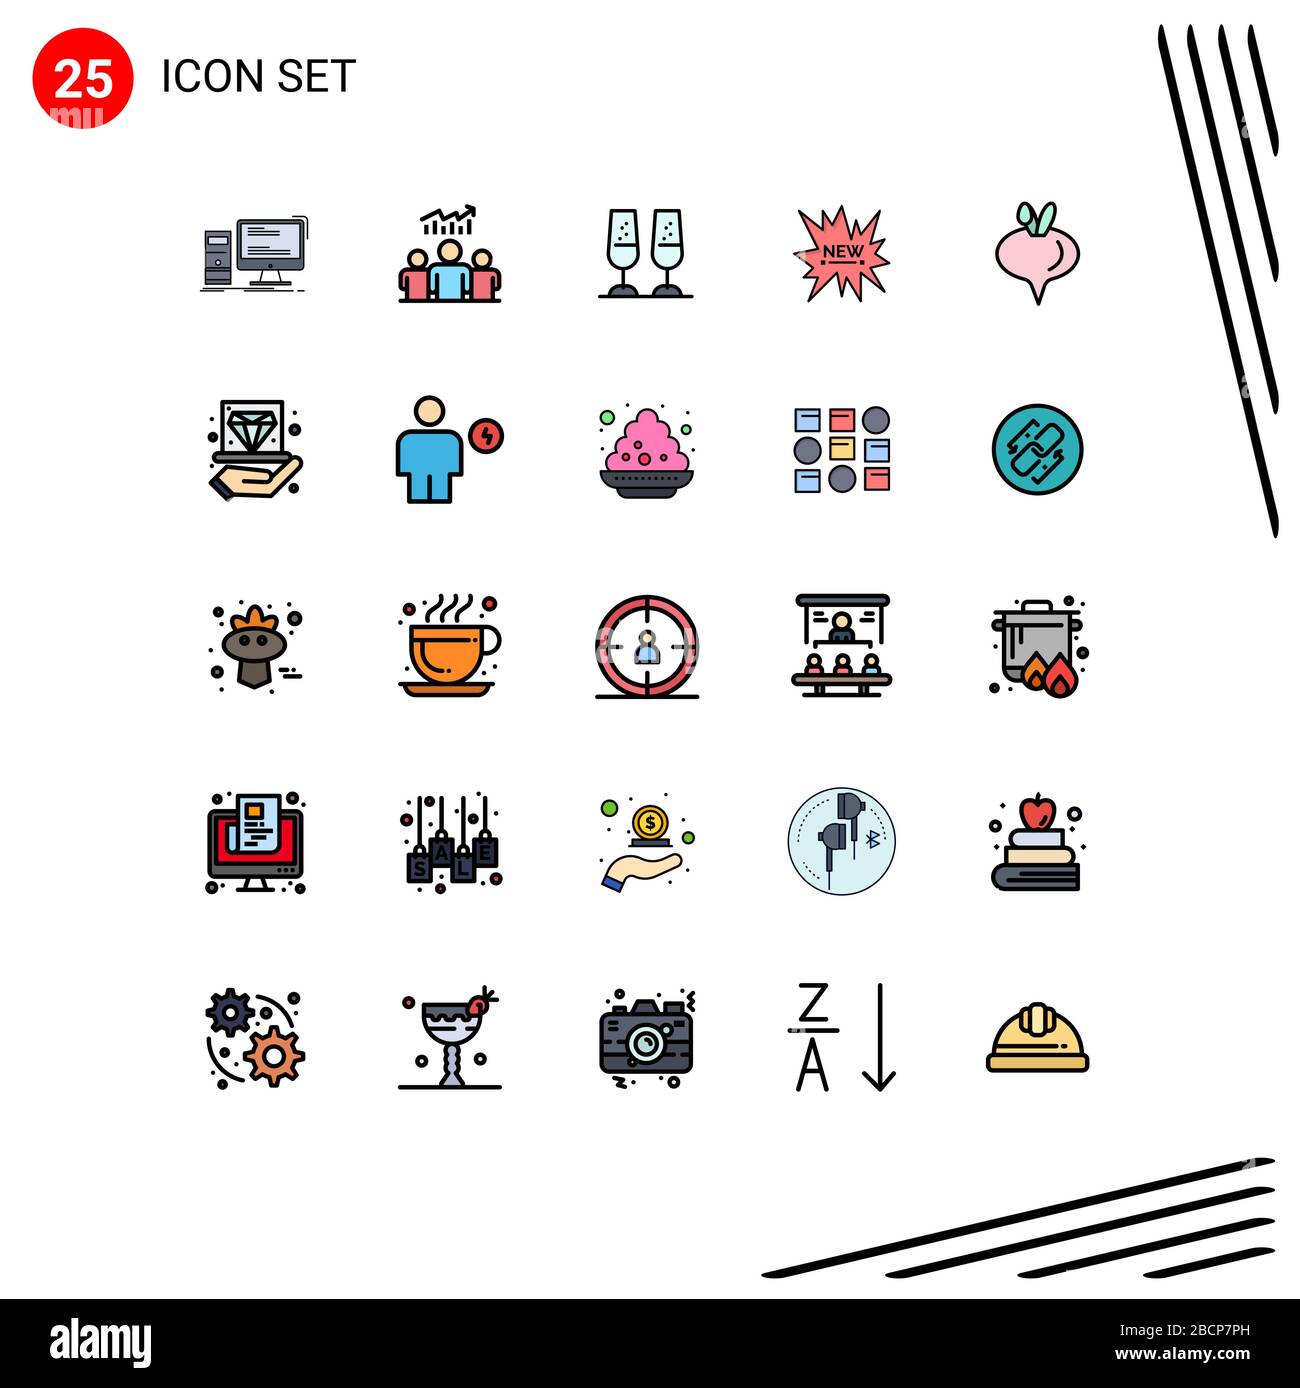 Set of 25 Modern UI Icons Symbols Signs for new, shopping, chart, ecommerce, cheers Editable Vector Design Elements Stock Vector